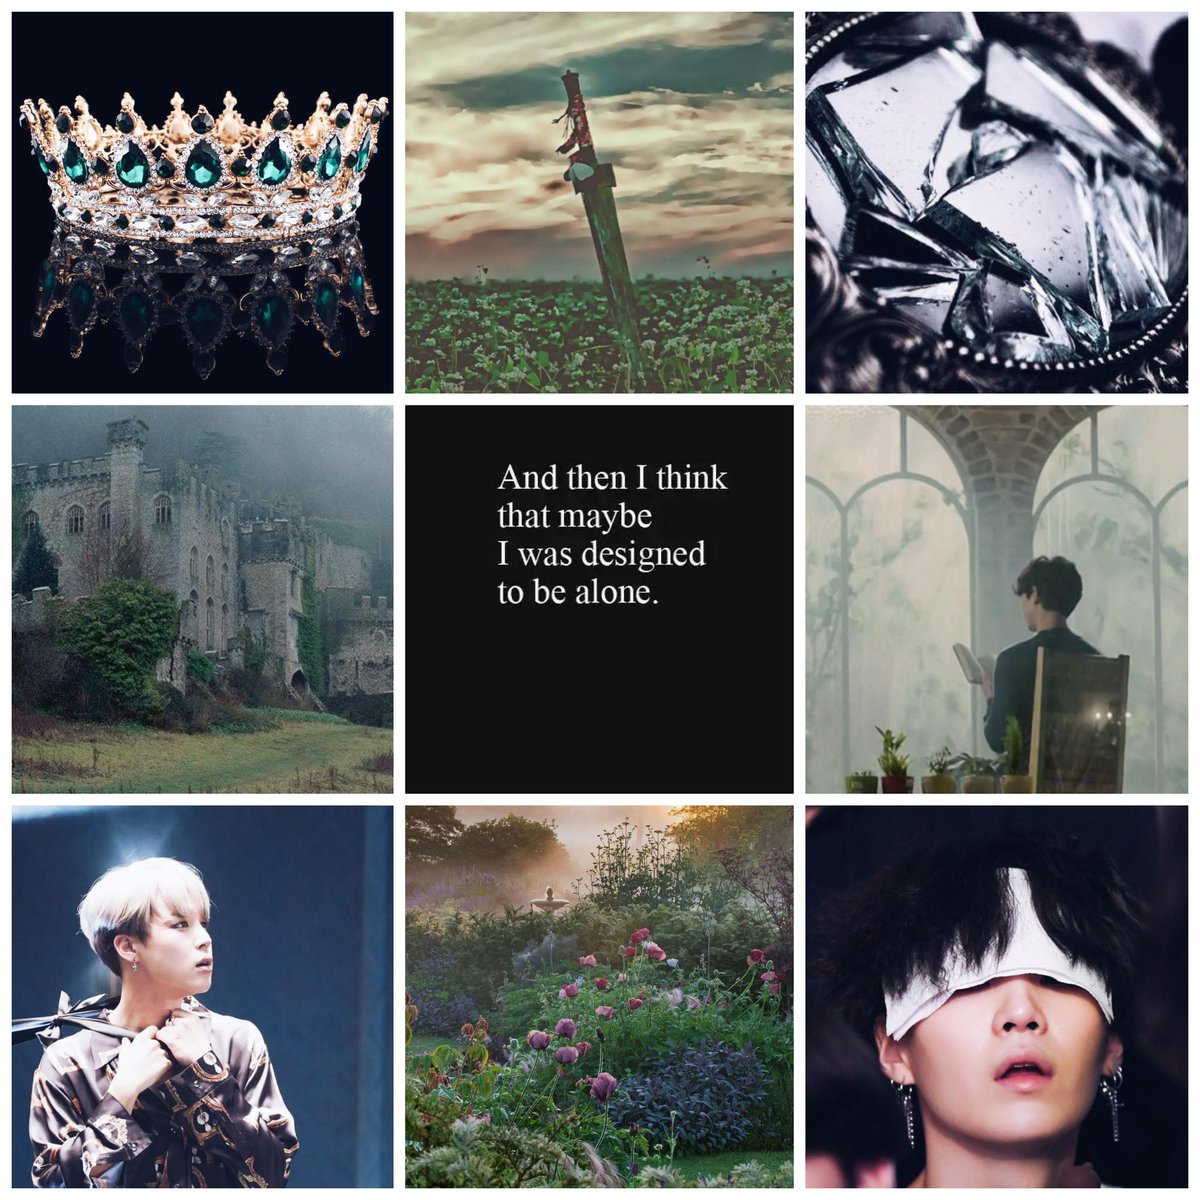 YOONMIN Basillisk AUHaving bet with friends Jimin sneaks into old castle to learn if the legendary Basillisk exists. Falling in love at first sight Yoongi is scared the boy turns into stone once he looks into his cursed eyes so he wears a blindfold posing as blind castle owner.